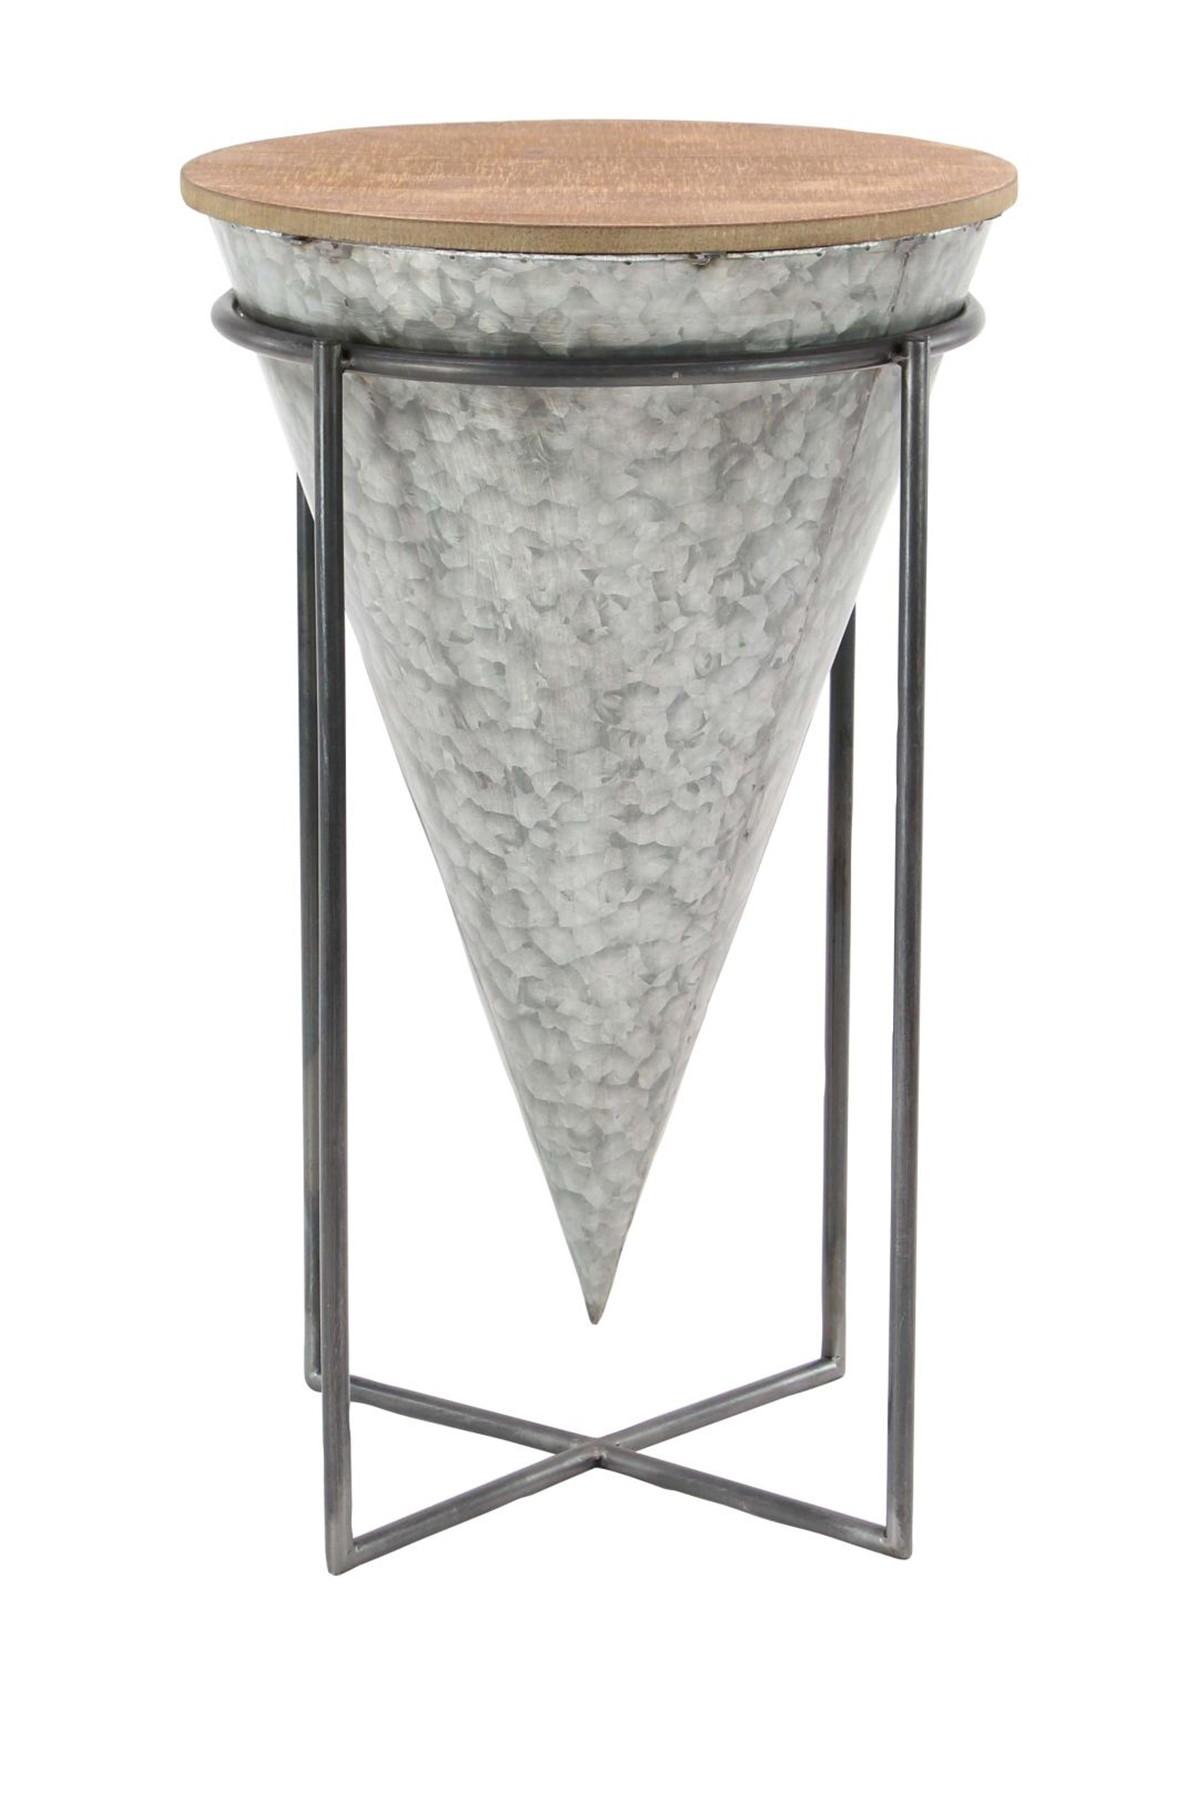 gray brown metal wood accent table products accents grey the room furniture white marble end large tilting patio umbrella battery operated lamps pottery barn night tables nursery